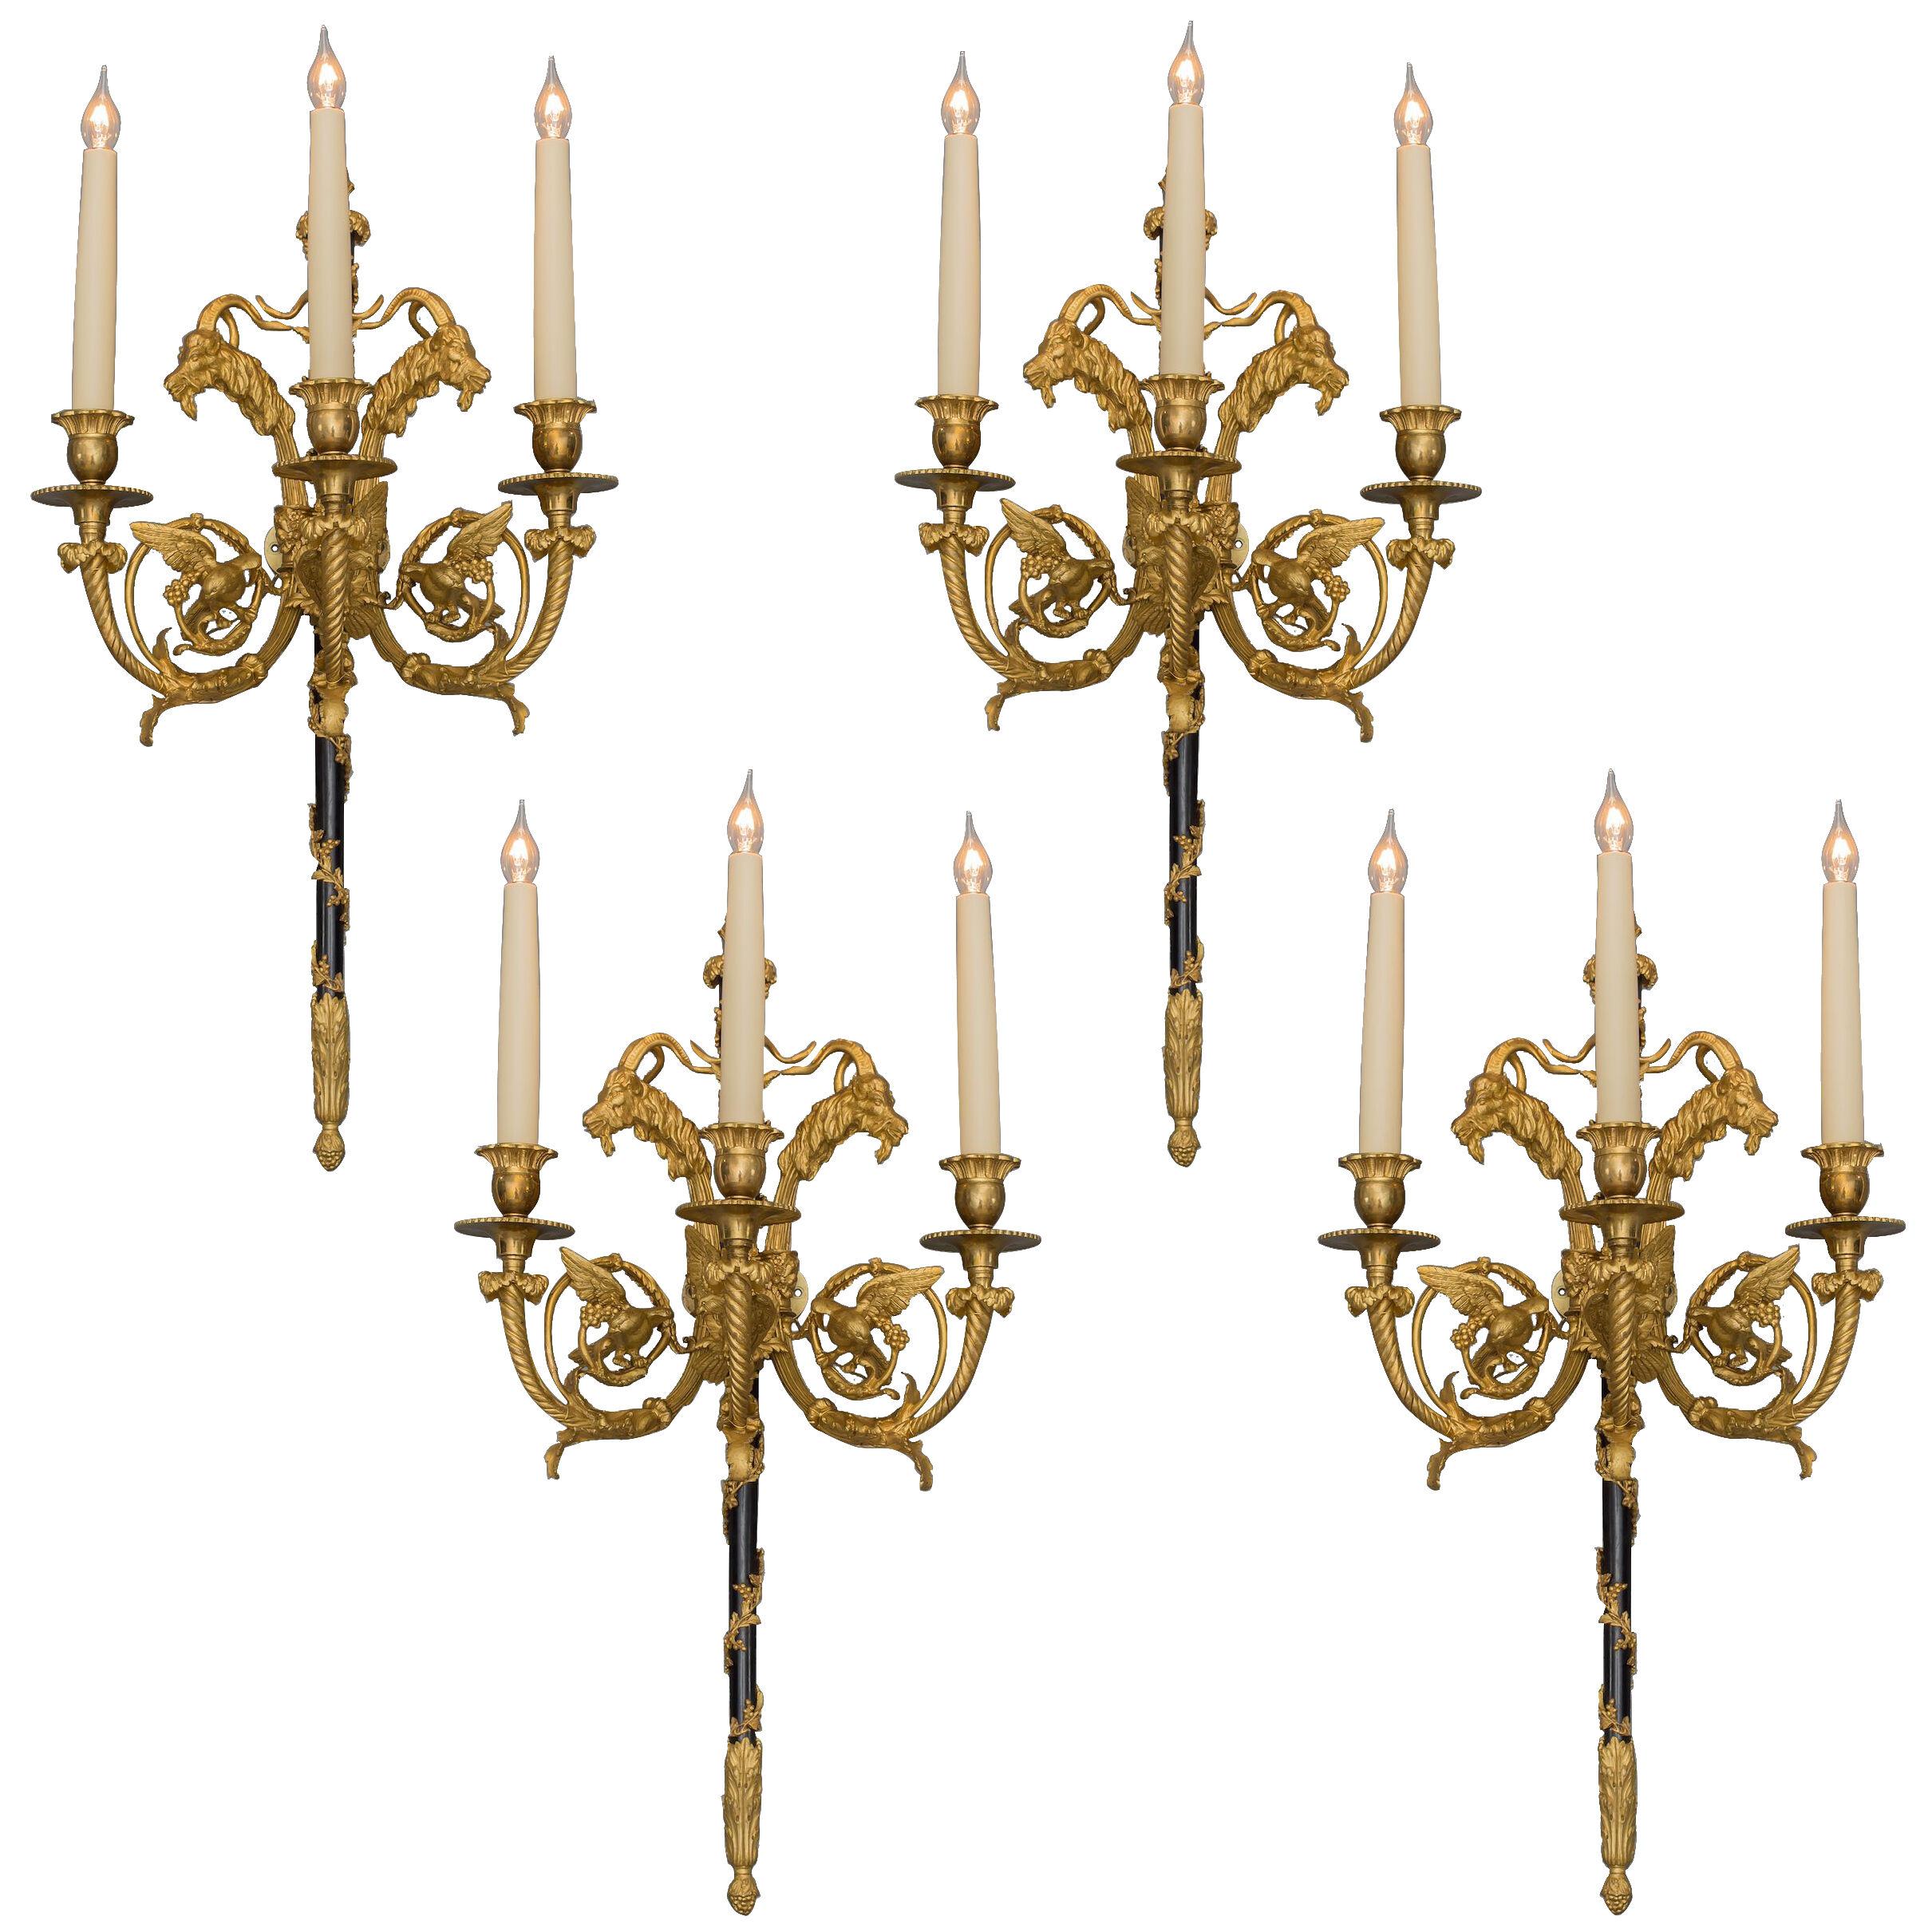 19th Century French Gilt and Patinated Bronze Wall Lights